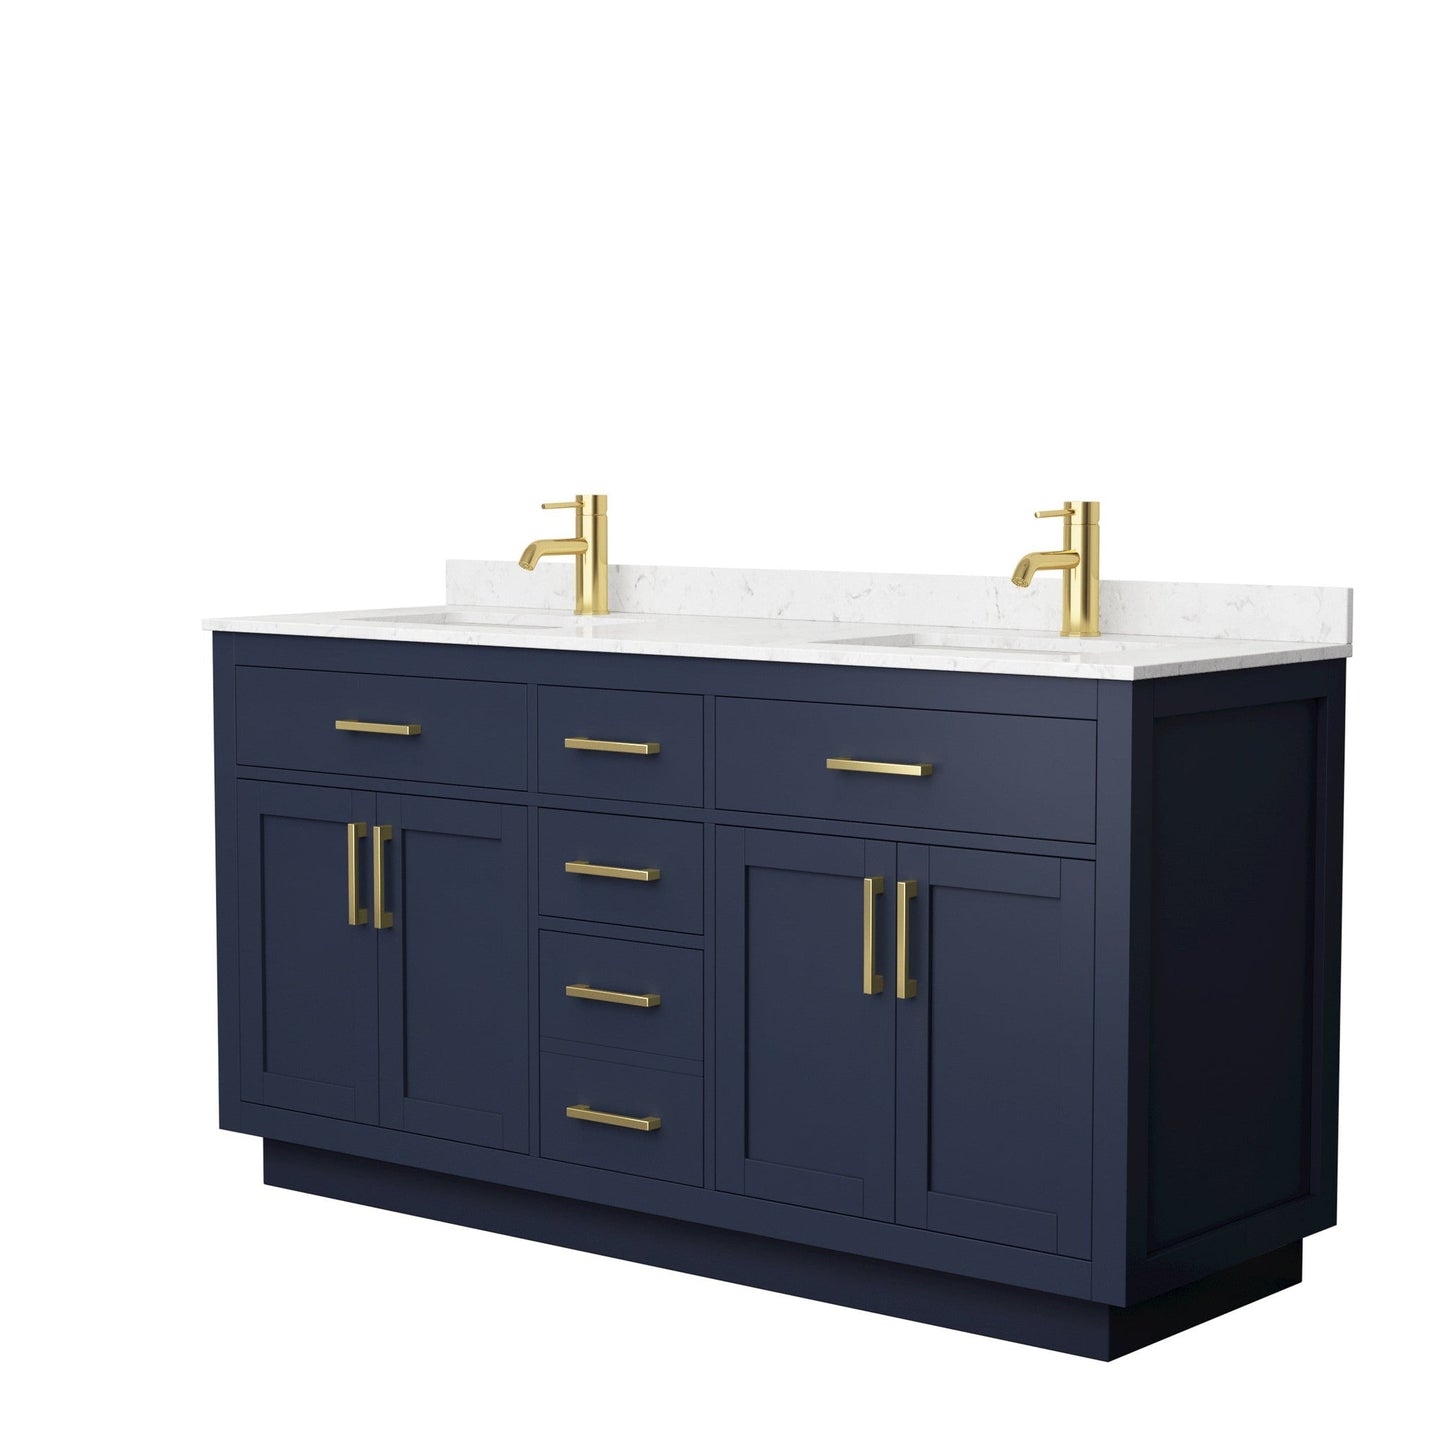 Beckett 66" Double Bathroom Vanity With Toe Kick in Dark Blue, Carrara Cultured Marble Countertop, Undermount Square Sinks, Brushed Gold Trim